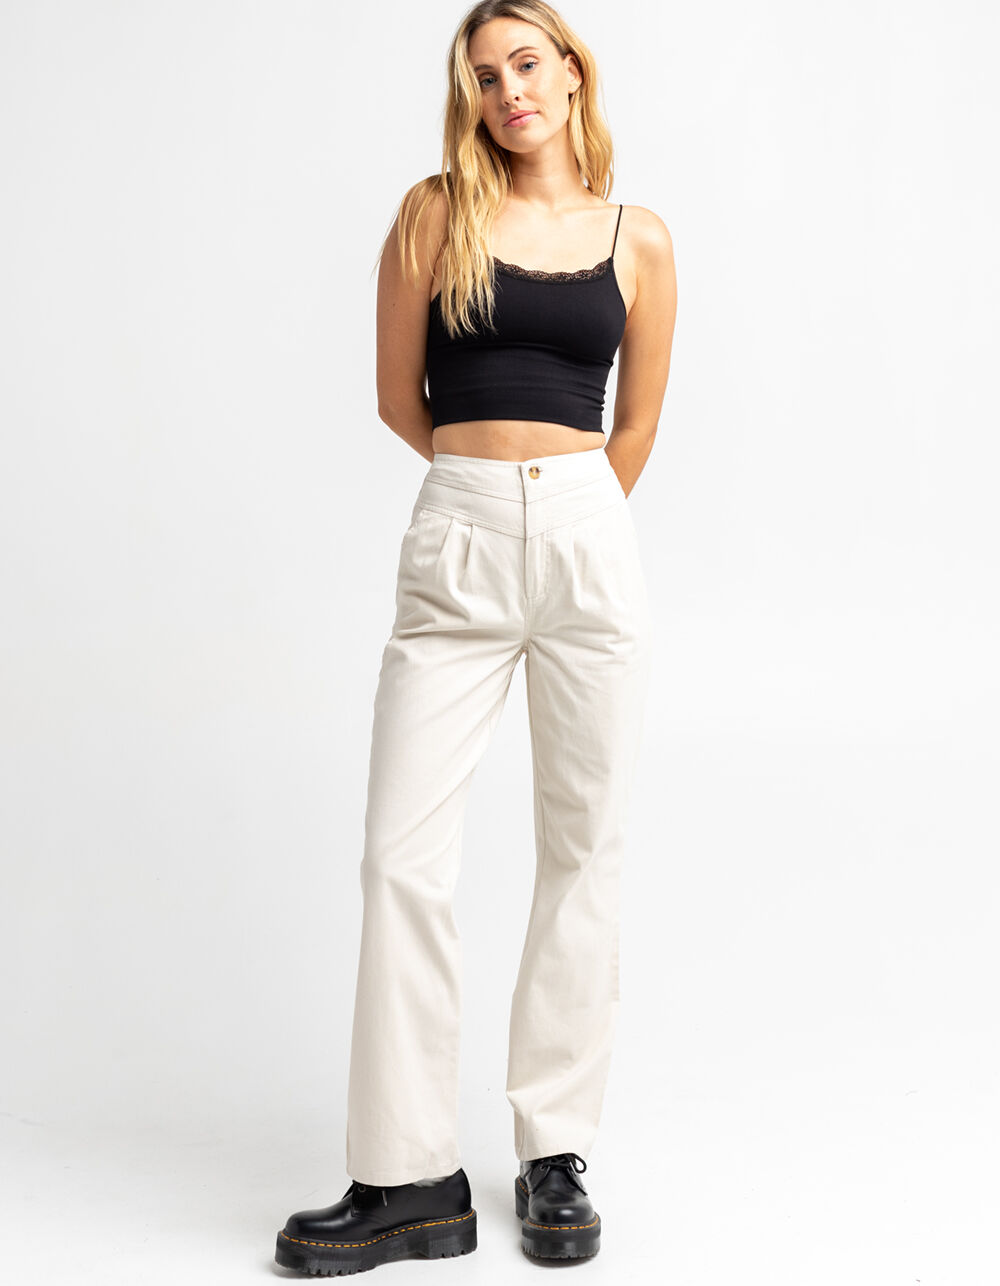 SKY AND SPARROW Womens Pleat Front Trouser Pants - STONE | Tillys